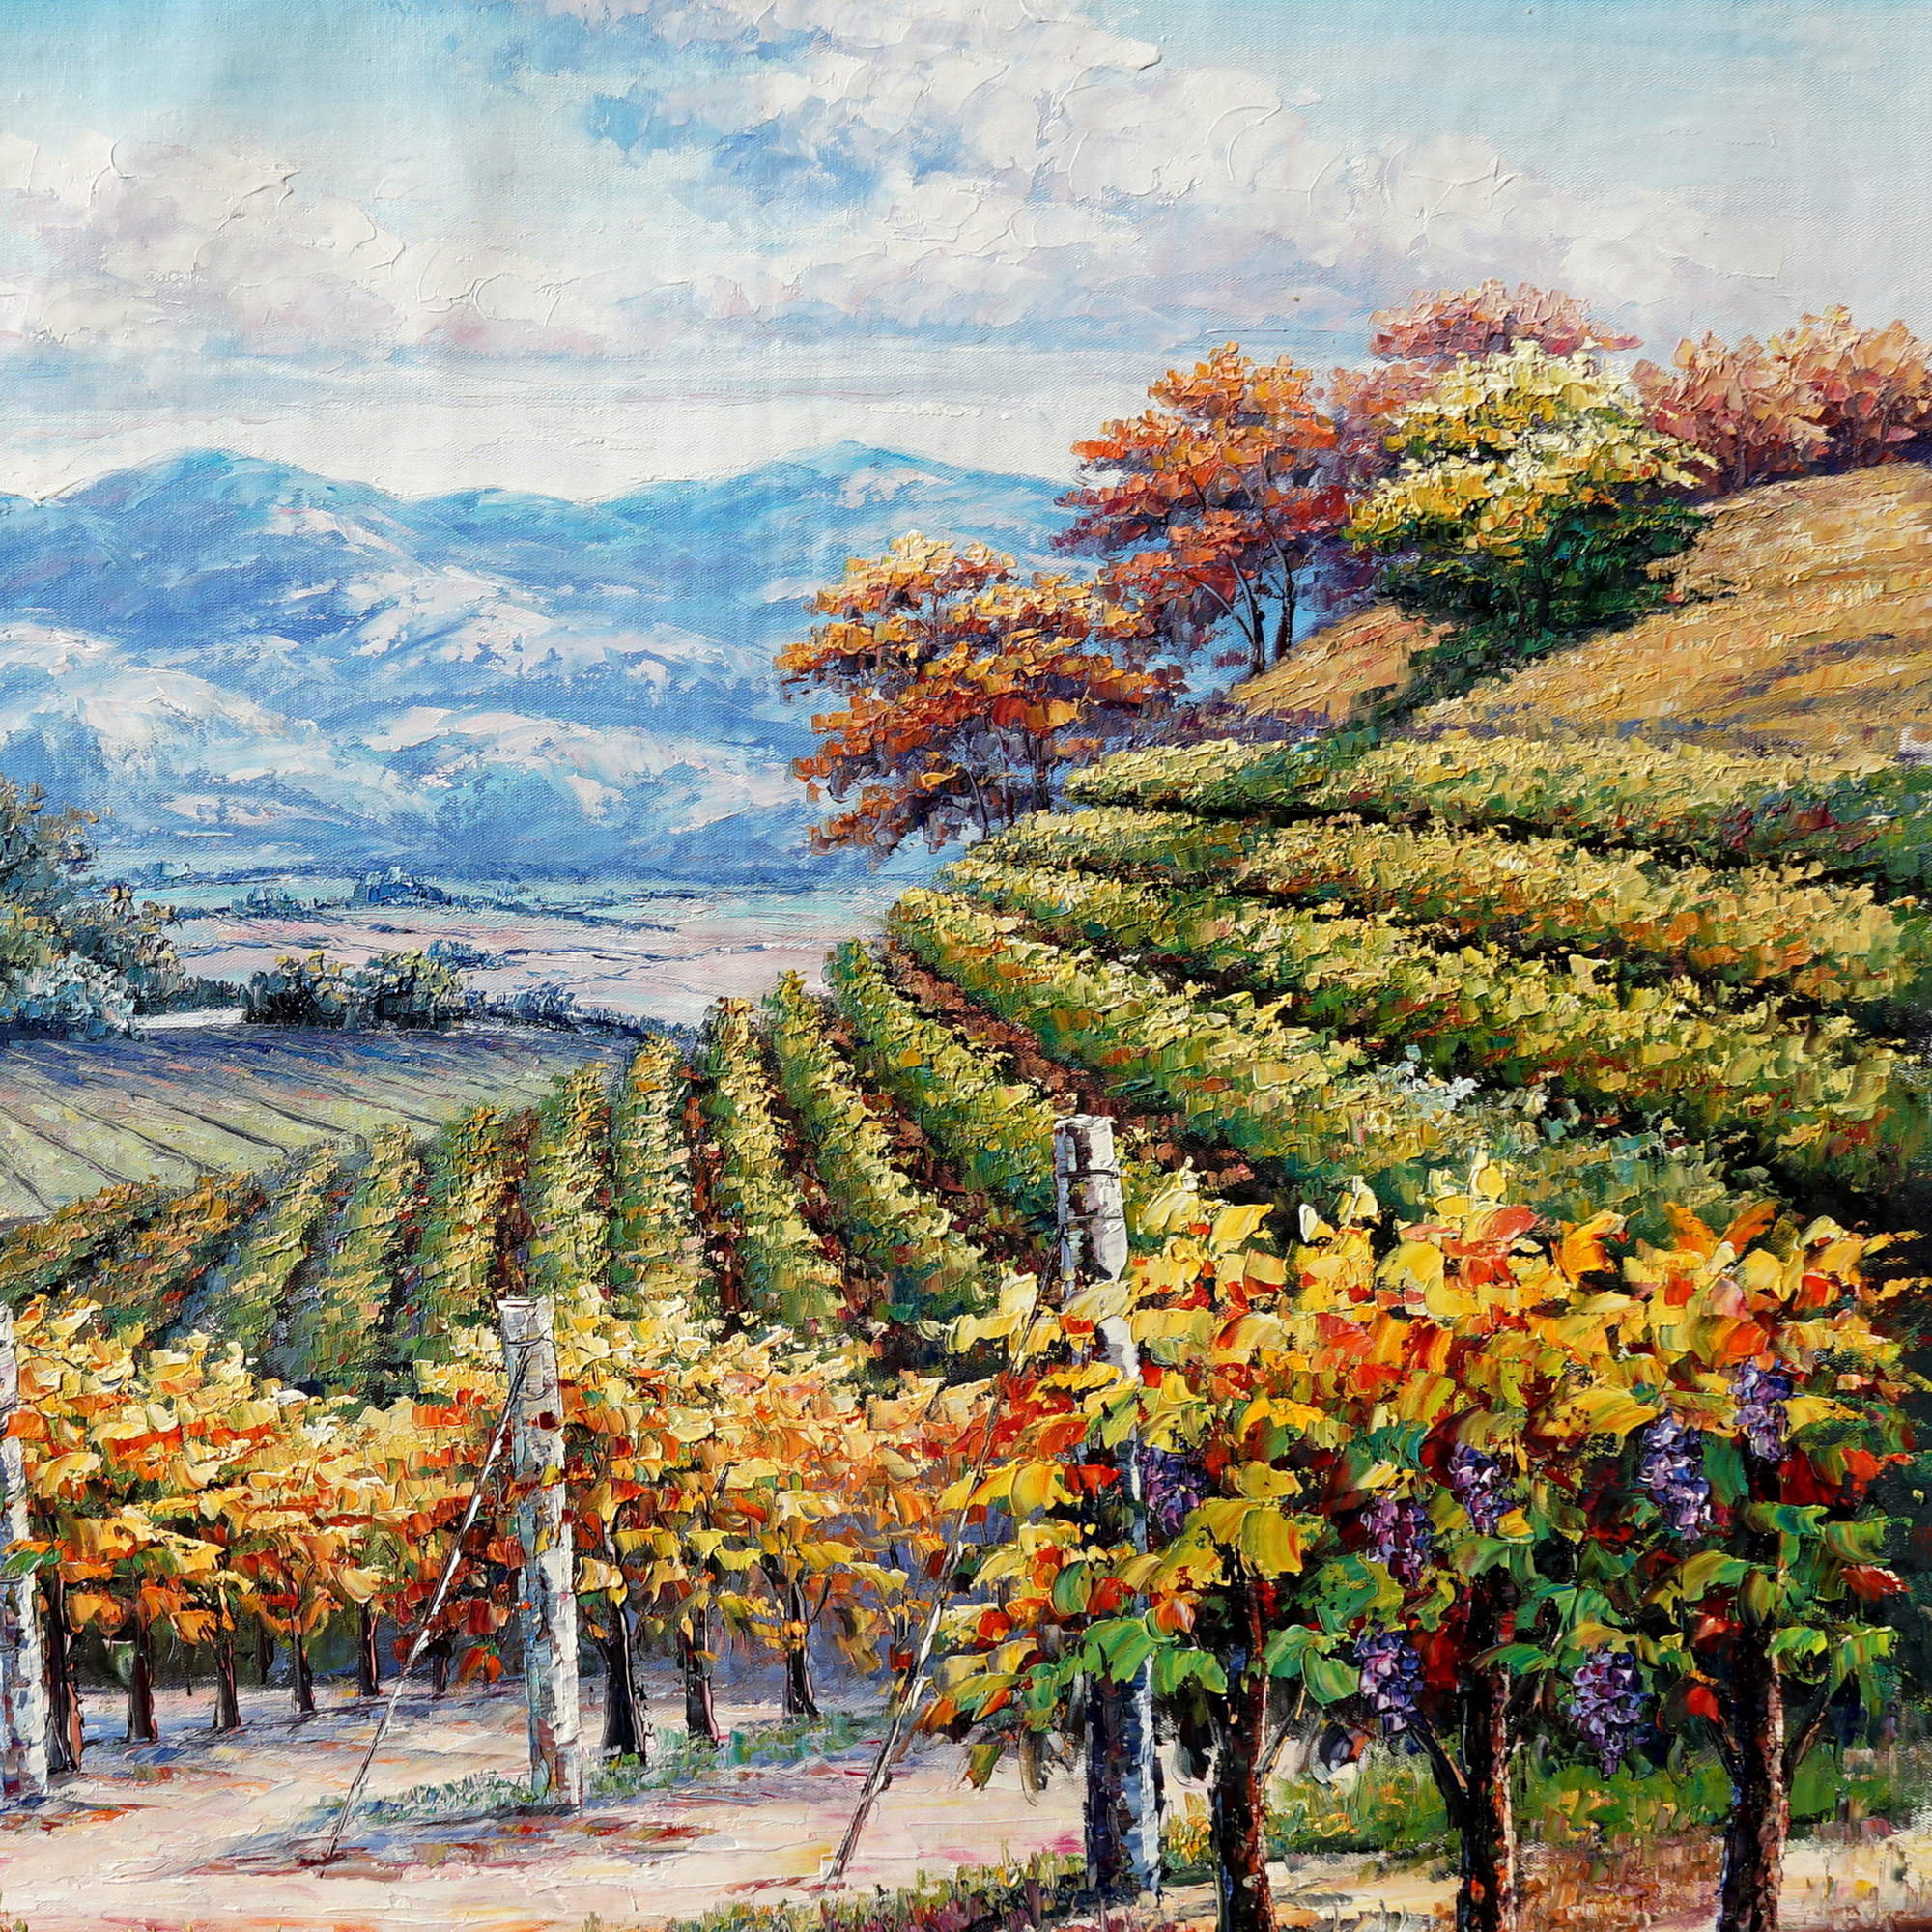 Hand painted Tuscany landscape with vineyards 75x100cm